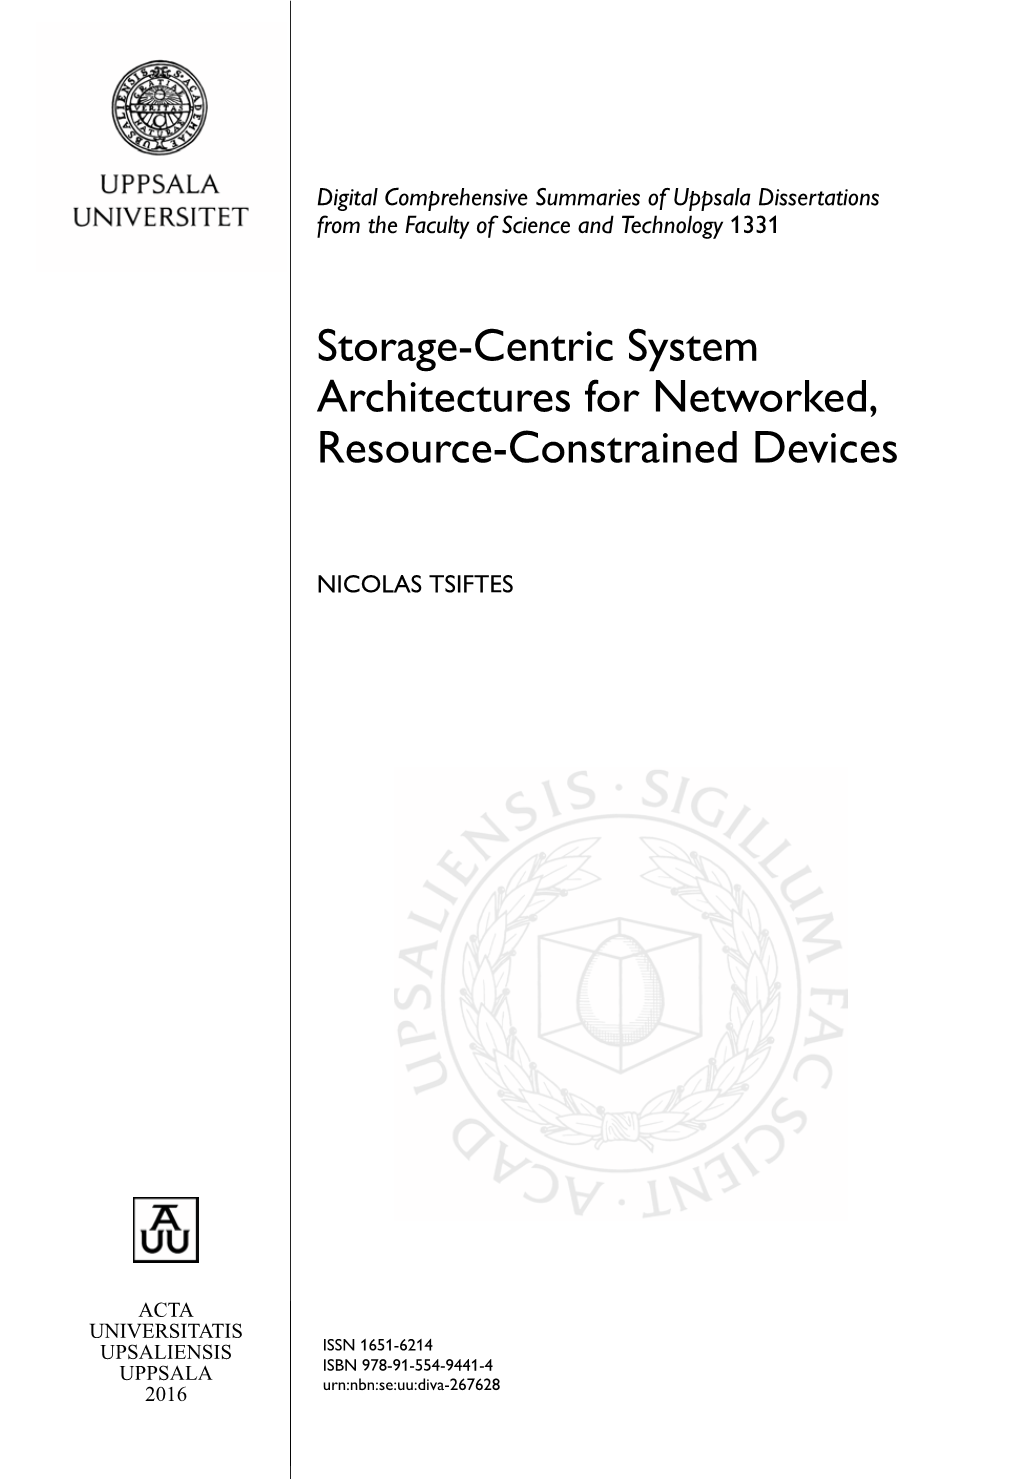 Storage-Centric System Architectures for Networked, Resource-Constrained Devices